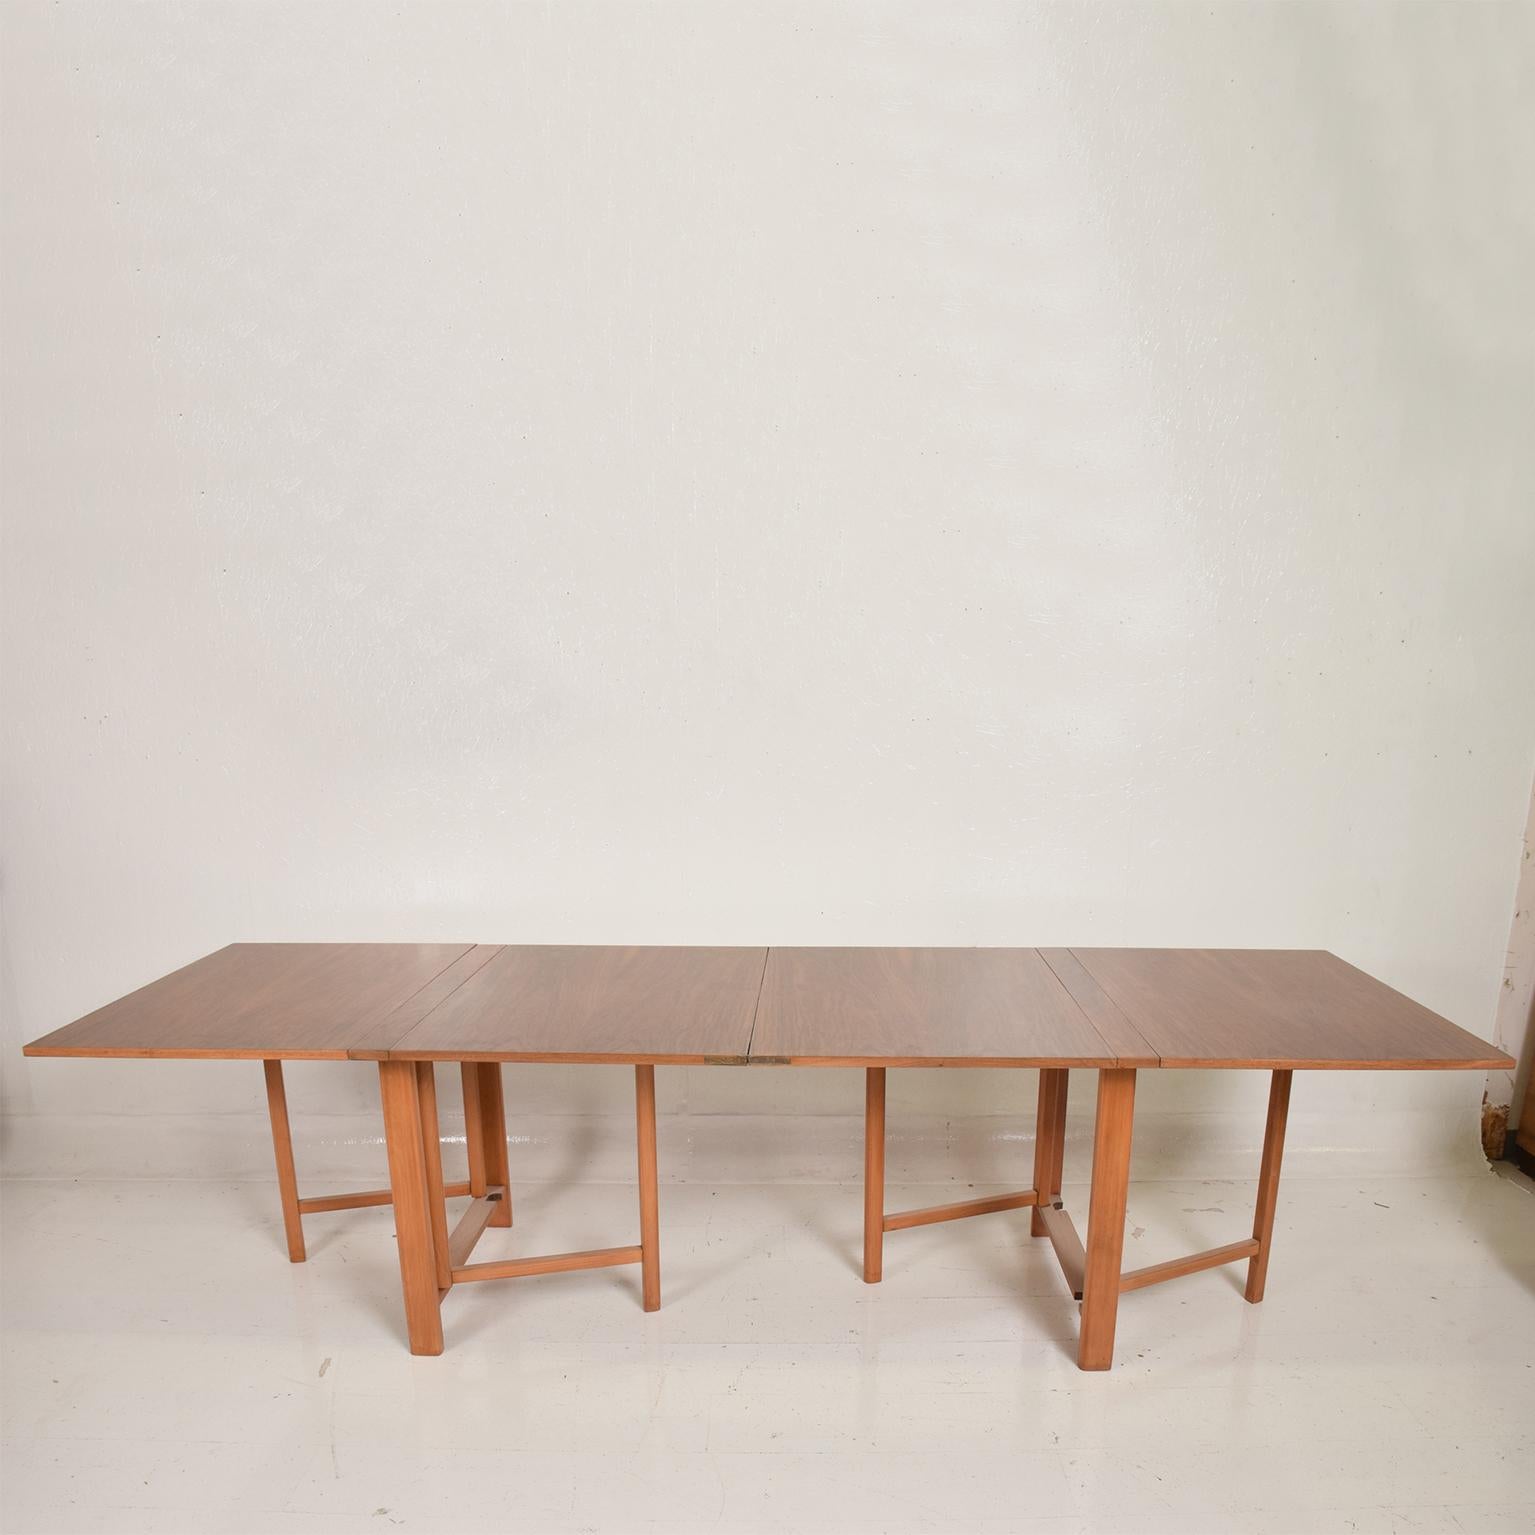 For your consideration, a midcentury Danish modern Maria table, Bruno Mathsson Scandinavian Modern. Beautiful table, very functional with the option to open a needed. It can seat from 2 to up to 10 persons. Doesn't retain makers label. It has a